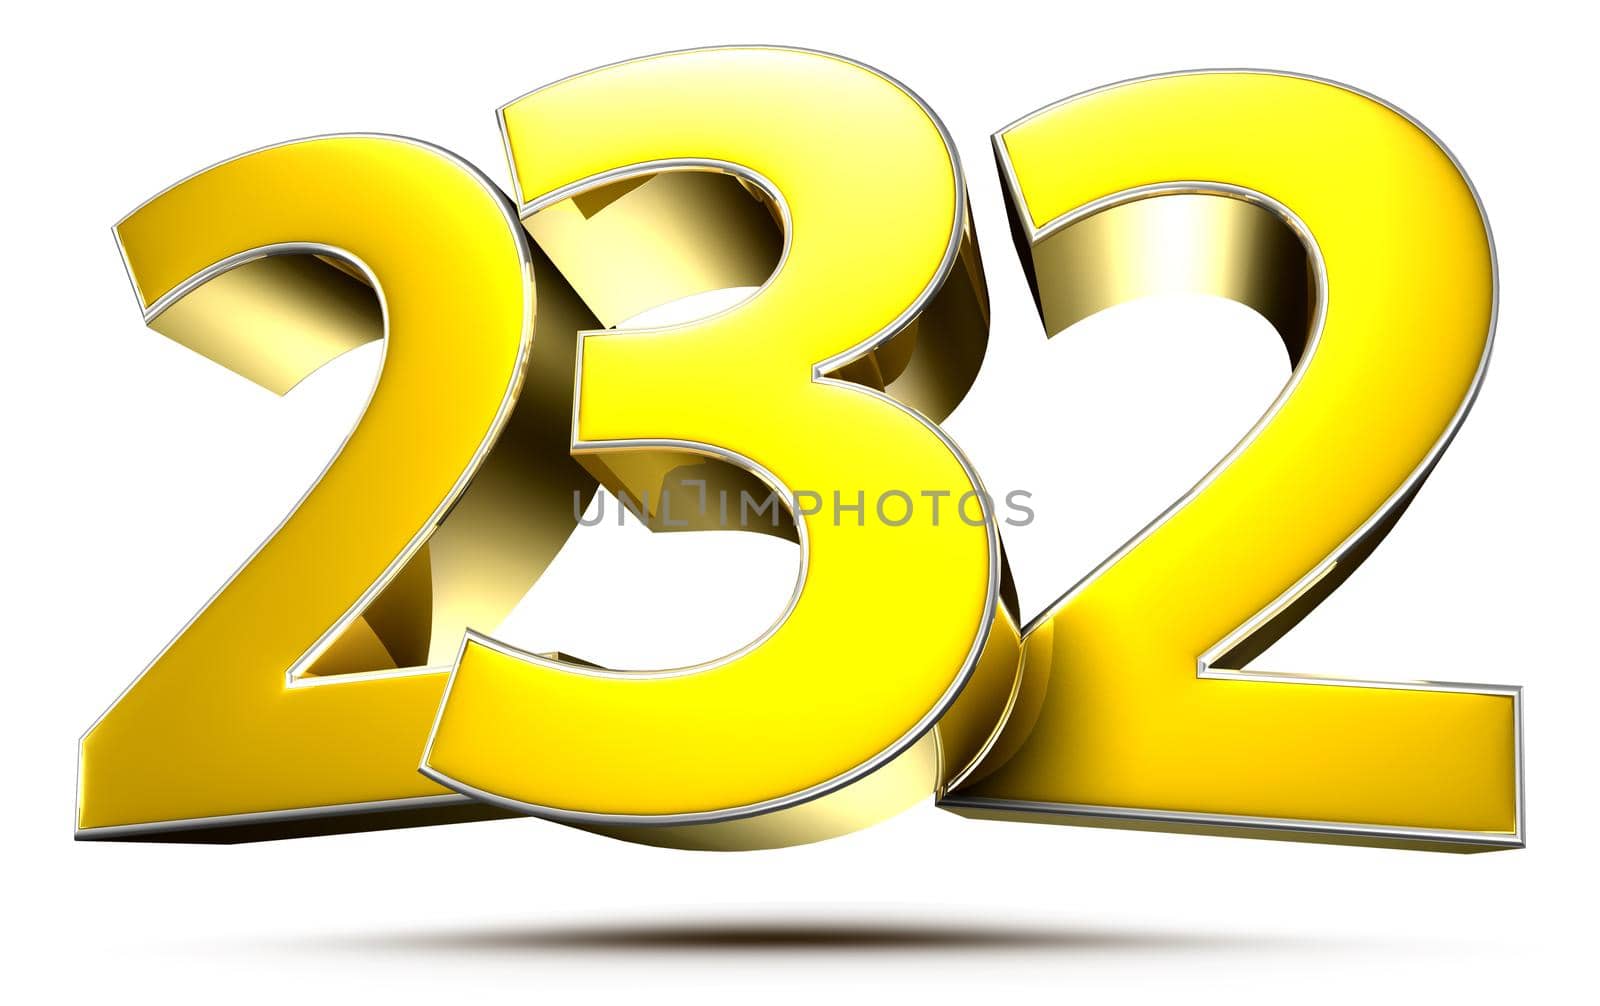 232 gold 3D illustration on white background with clipping path. by thitimontoyai